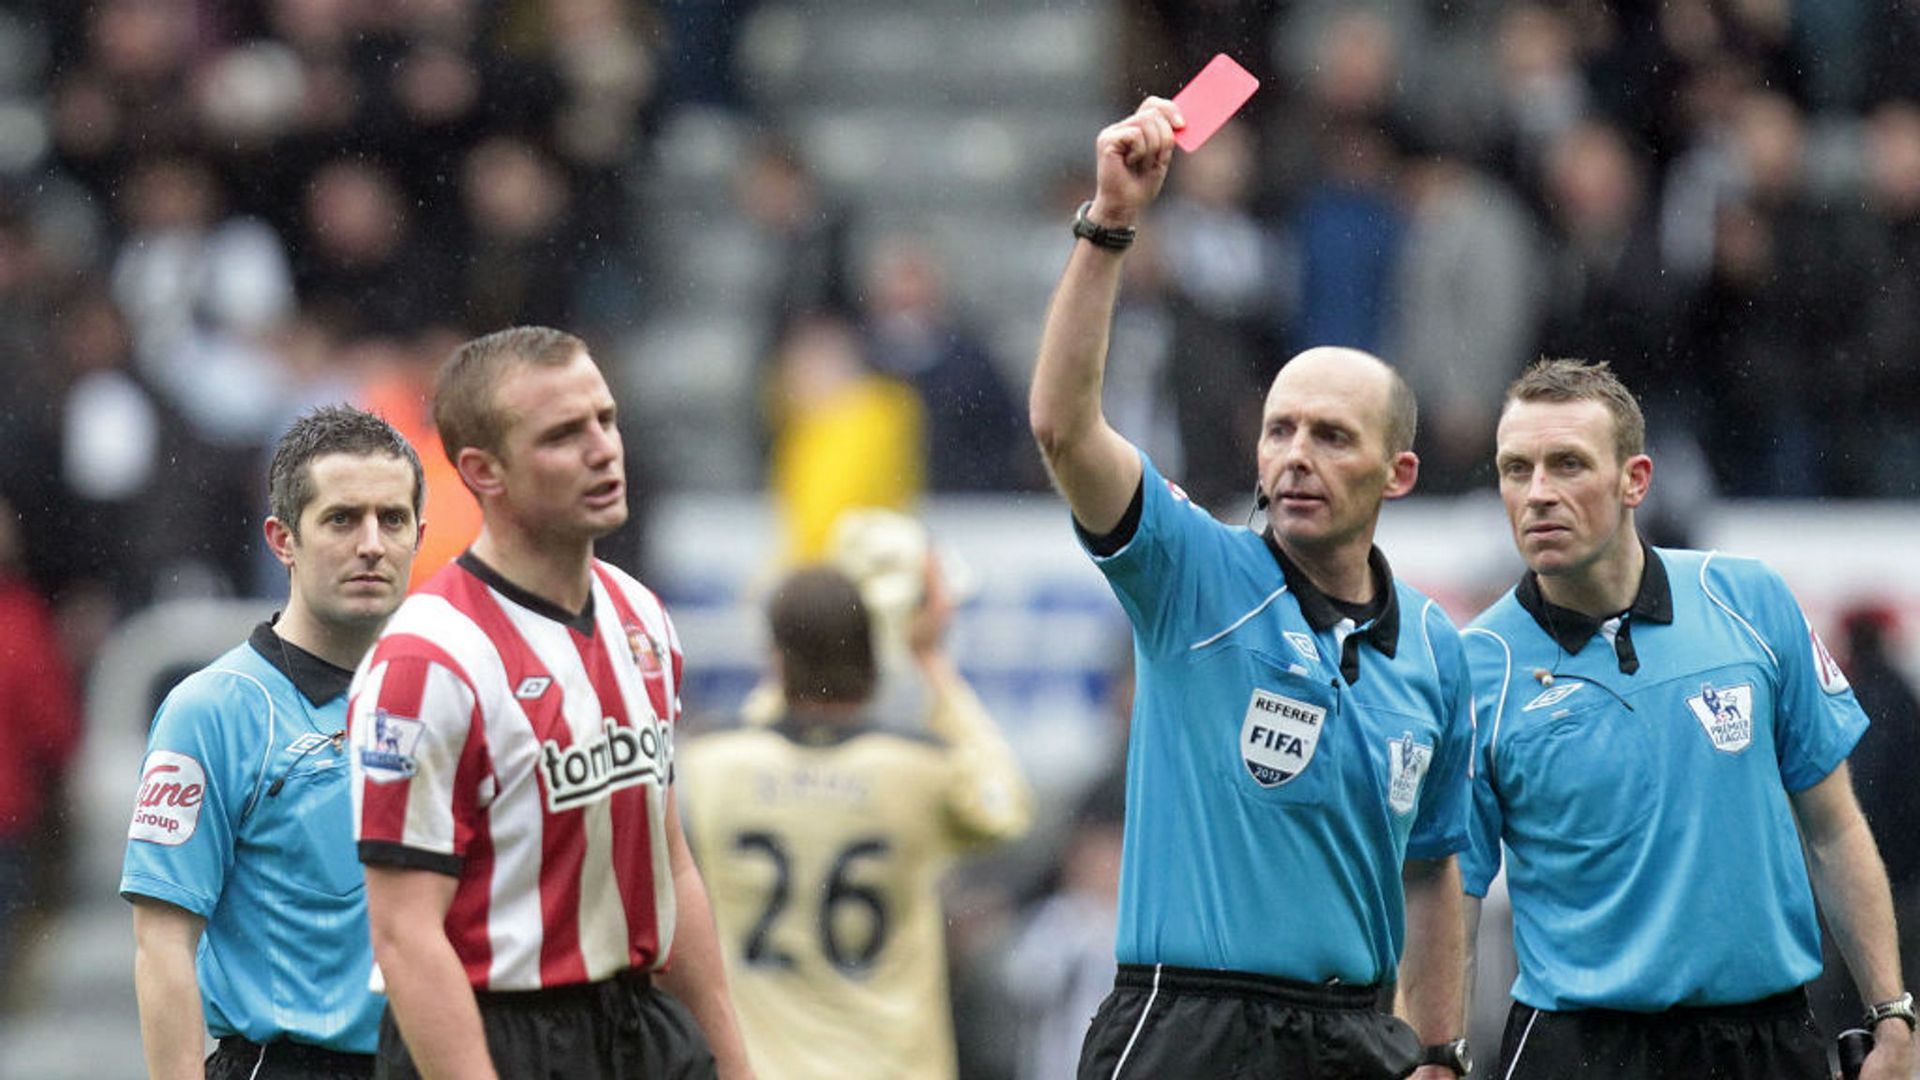 Lee Cattermole – 7 Red Cards in Premier League